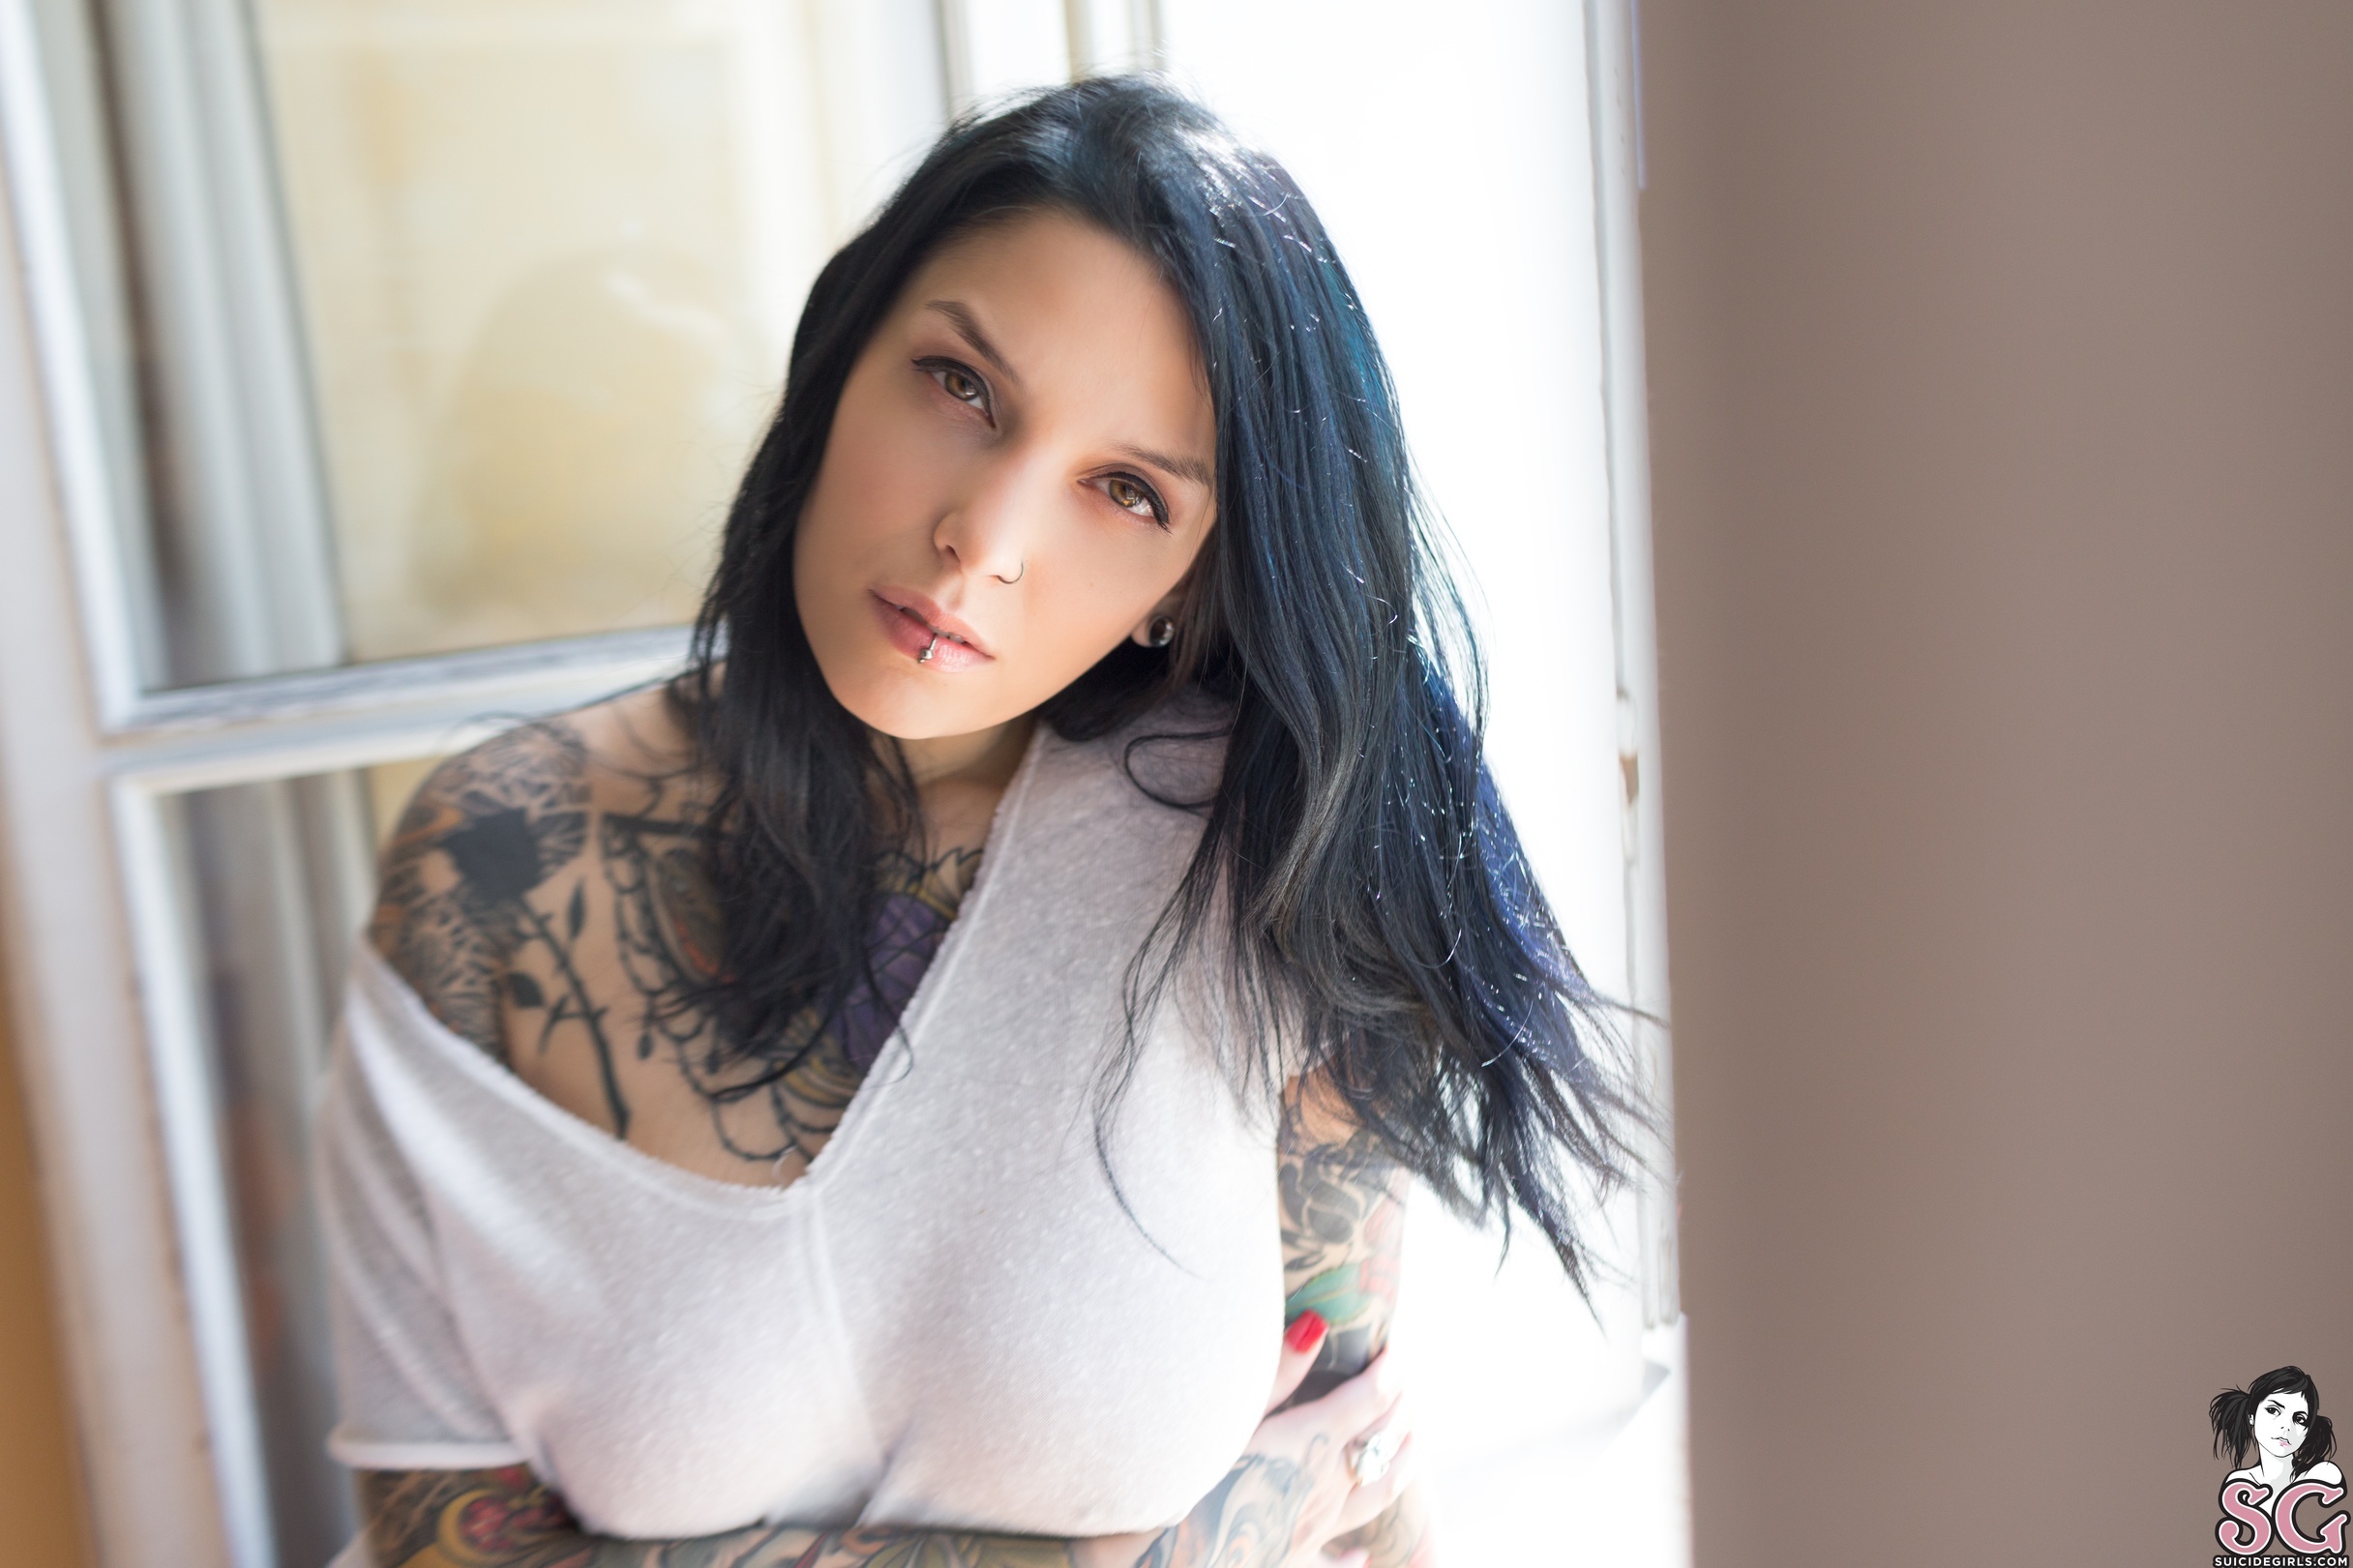 People 2432x1621 women brunette long hair tattoo bedroom curtains window Suicide Girls Valkyria Suicide watermarked